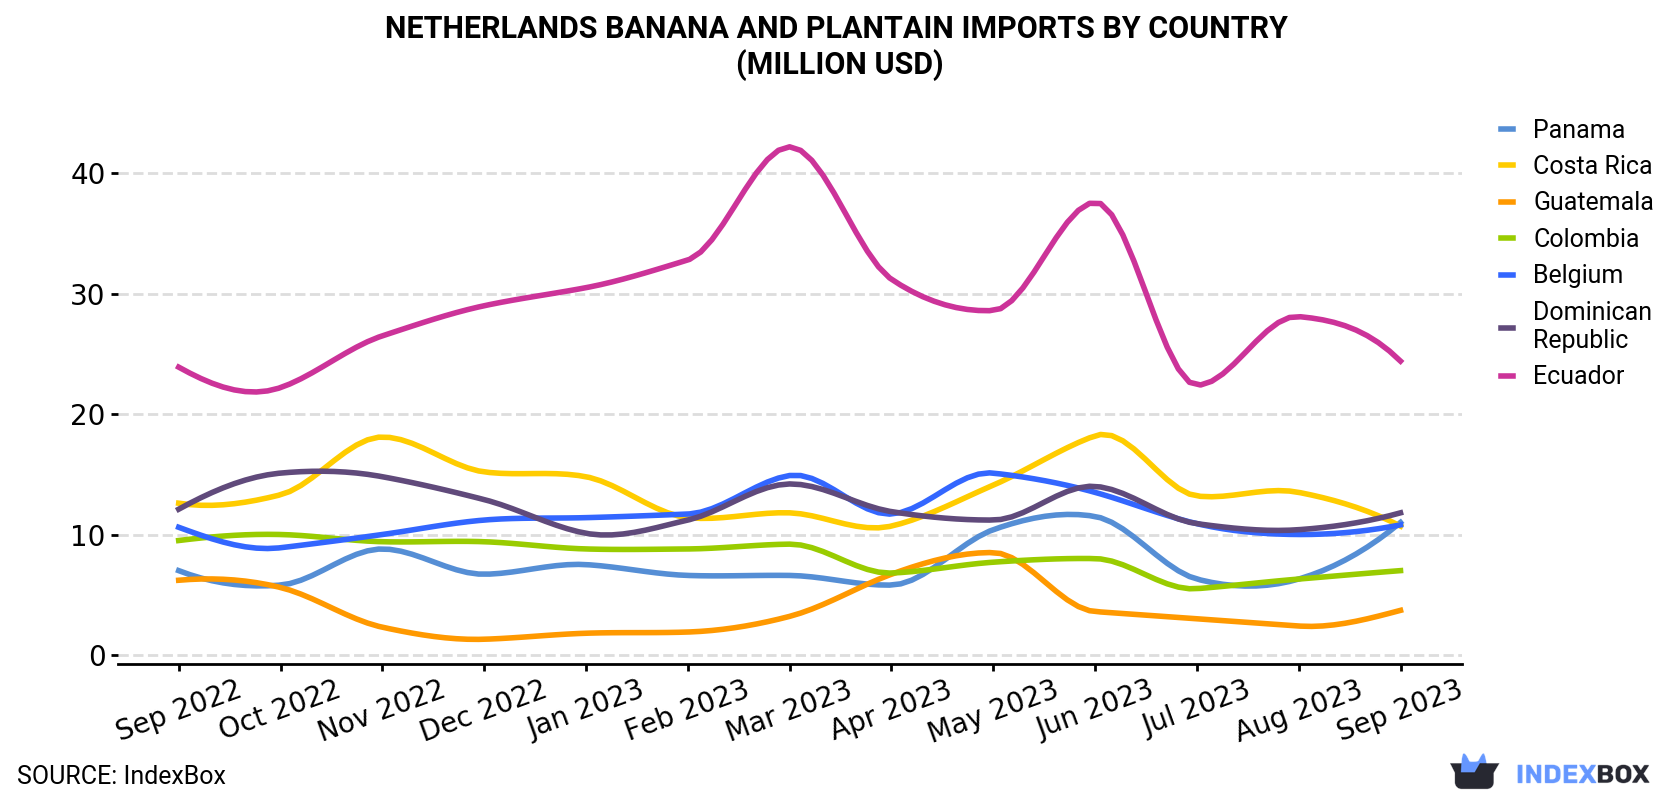 Netherlands Banana and Plantain Imports By Country (Million USD)